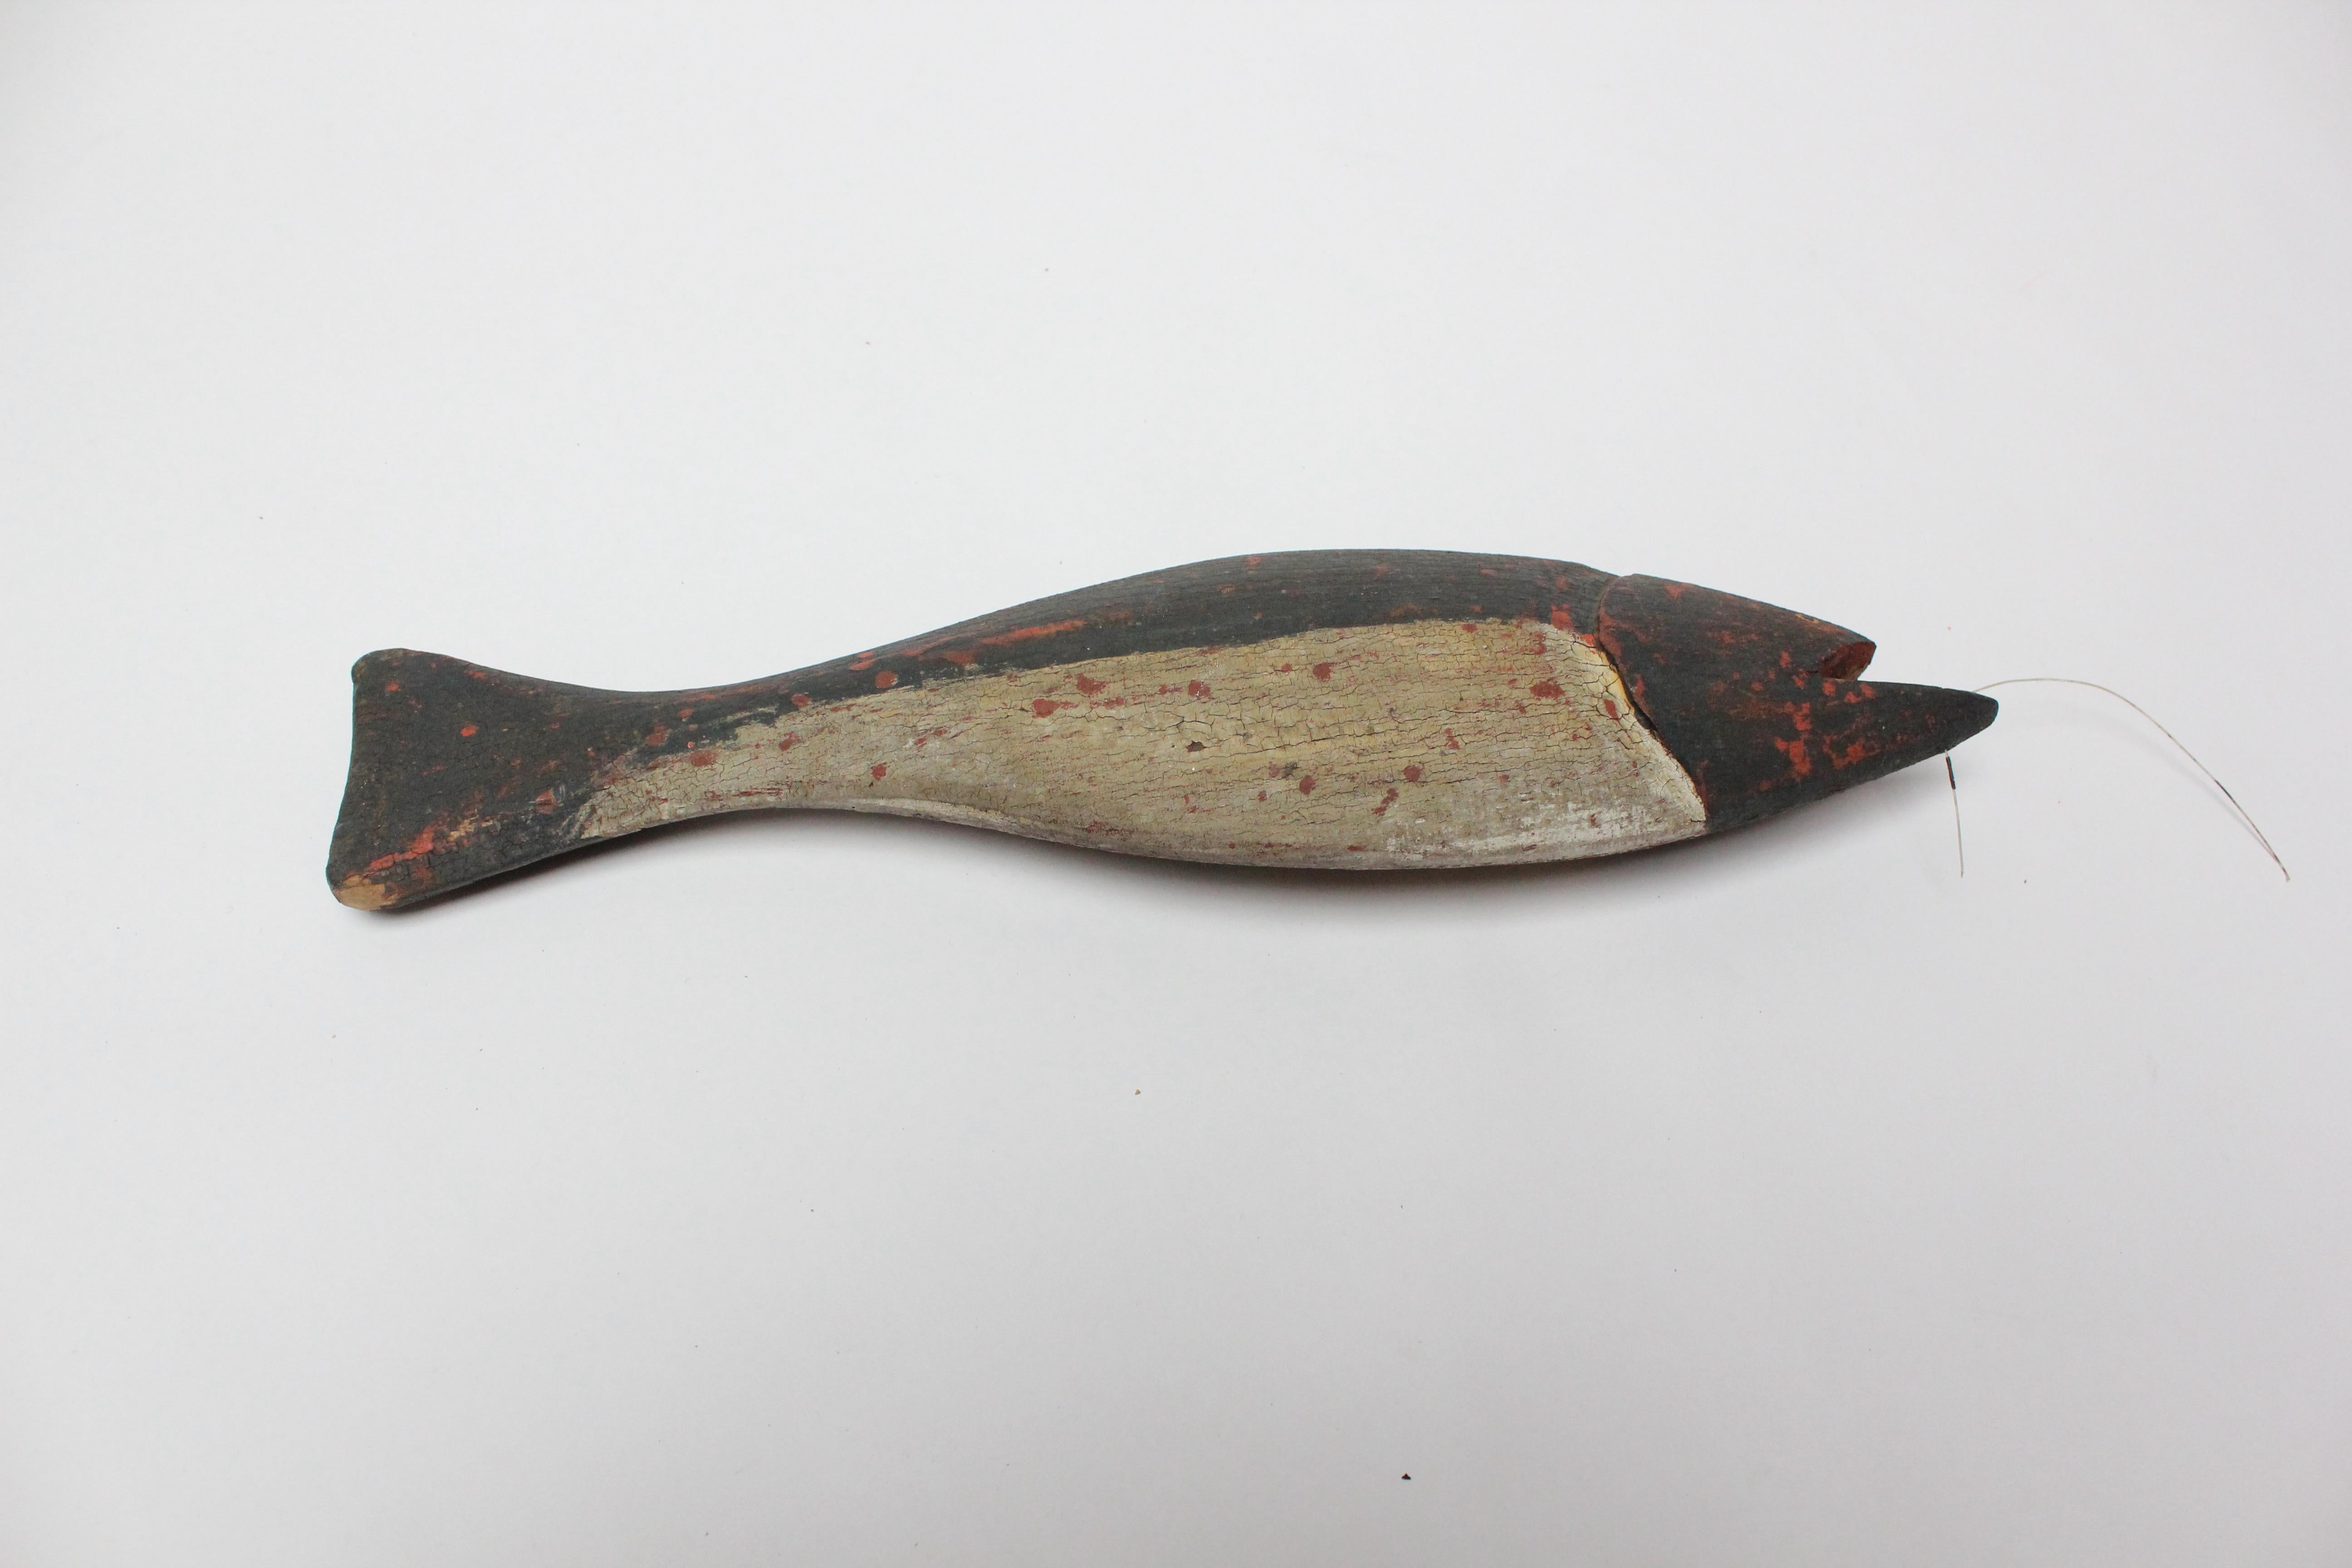 American Folk Art hand-carved and painted fish decoy with a fishing line in its mouth (ca. 1940s, USA). Natural patina, crazing, and paint loss present - the red base coat can be seen in spots where the white or black paint has peeled. Remains a